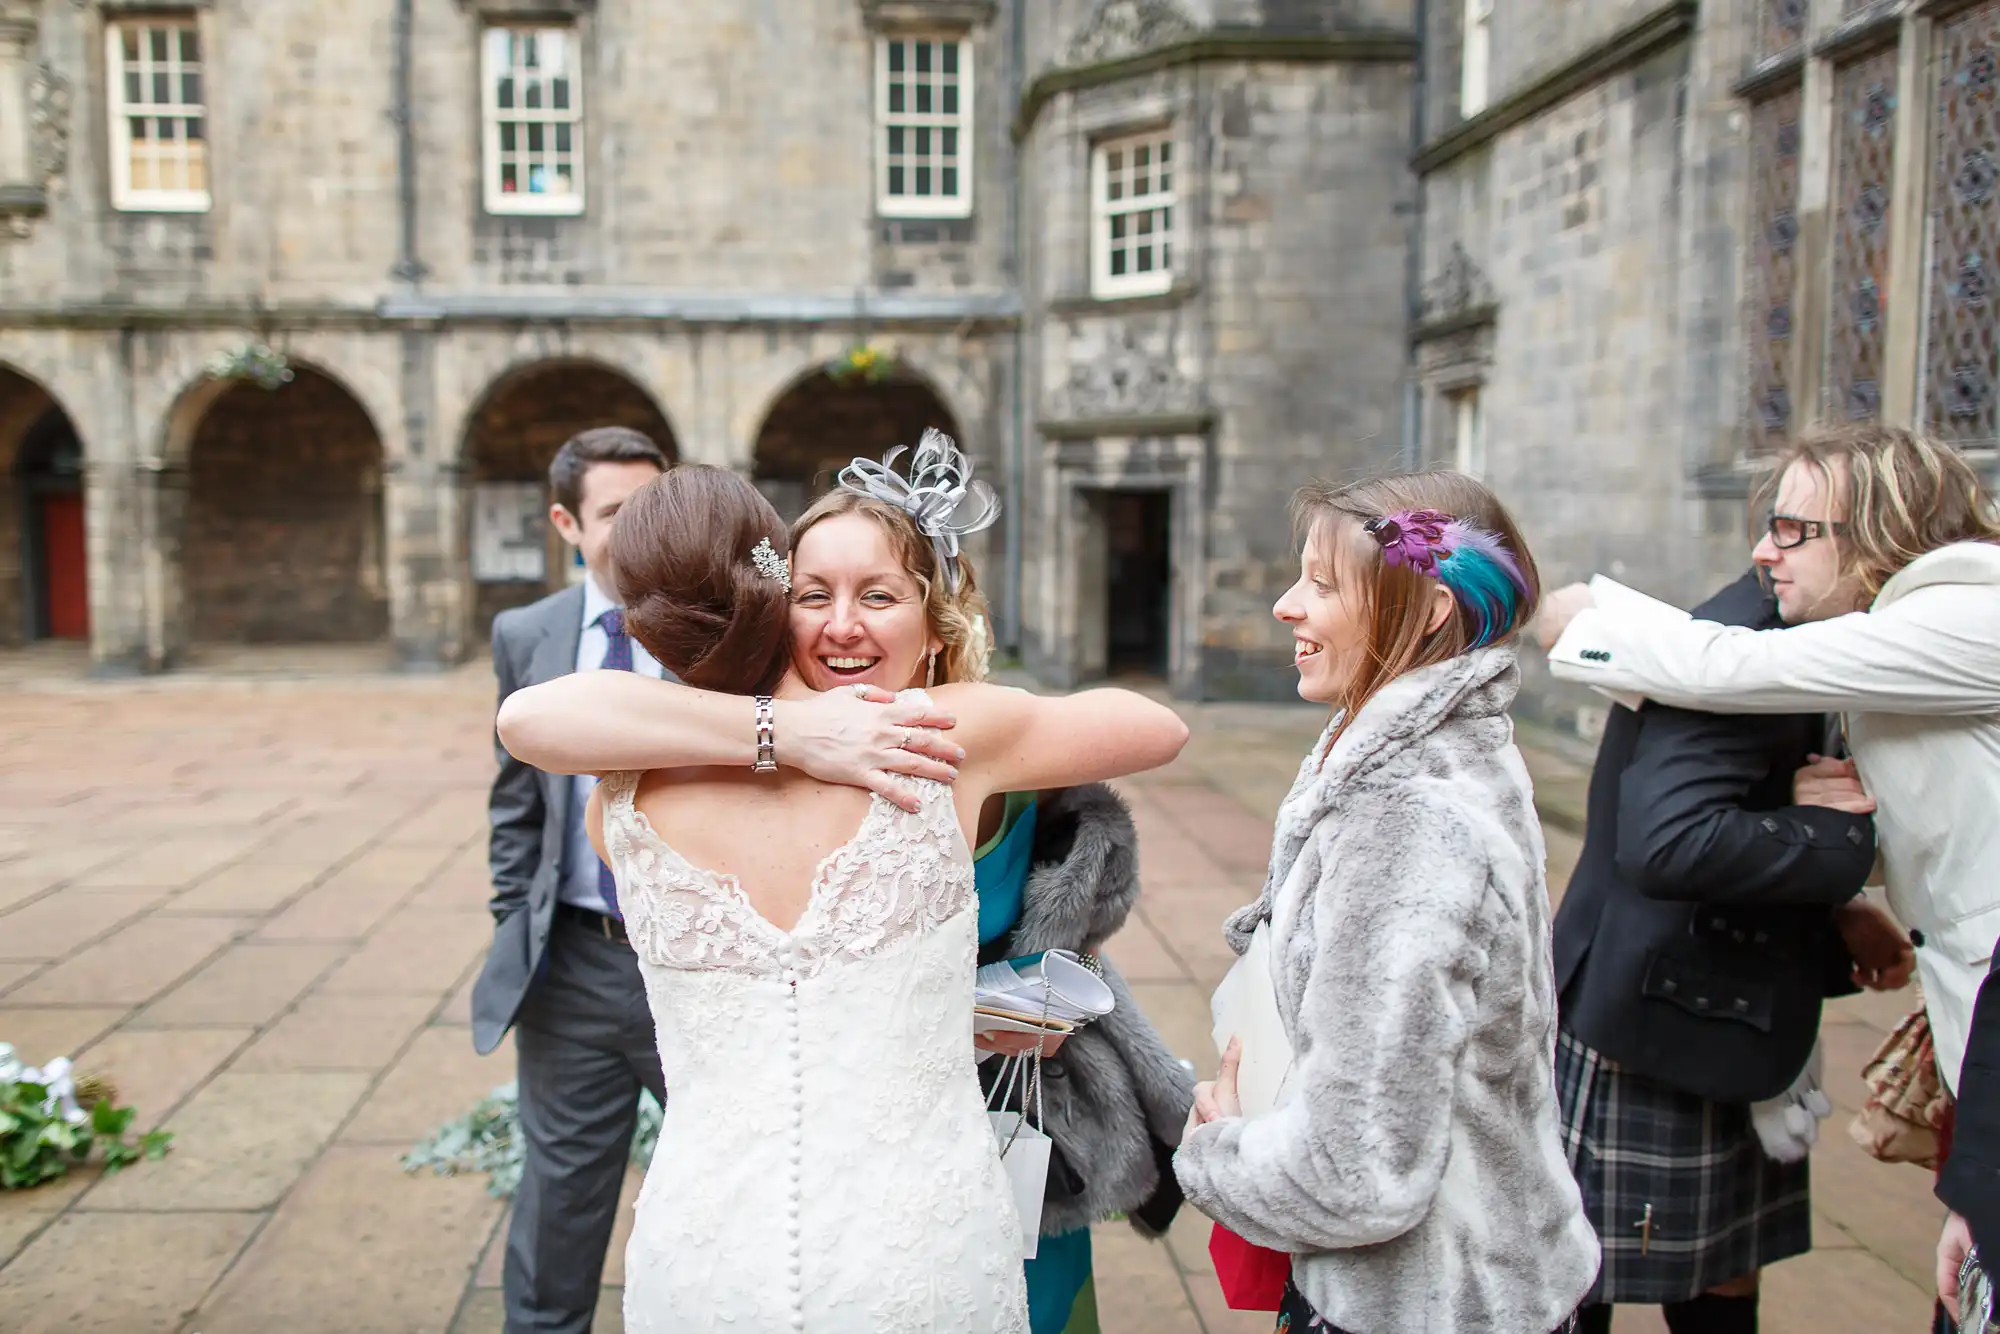 A bride in a white dress embraces a guest in a courtyard, surrounded by other smiling guests during a wedding ceremony.